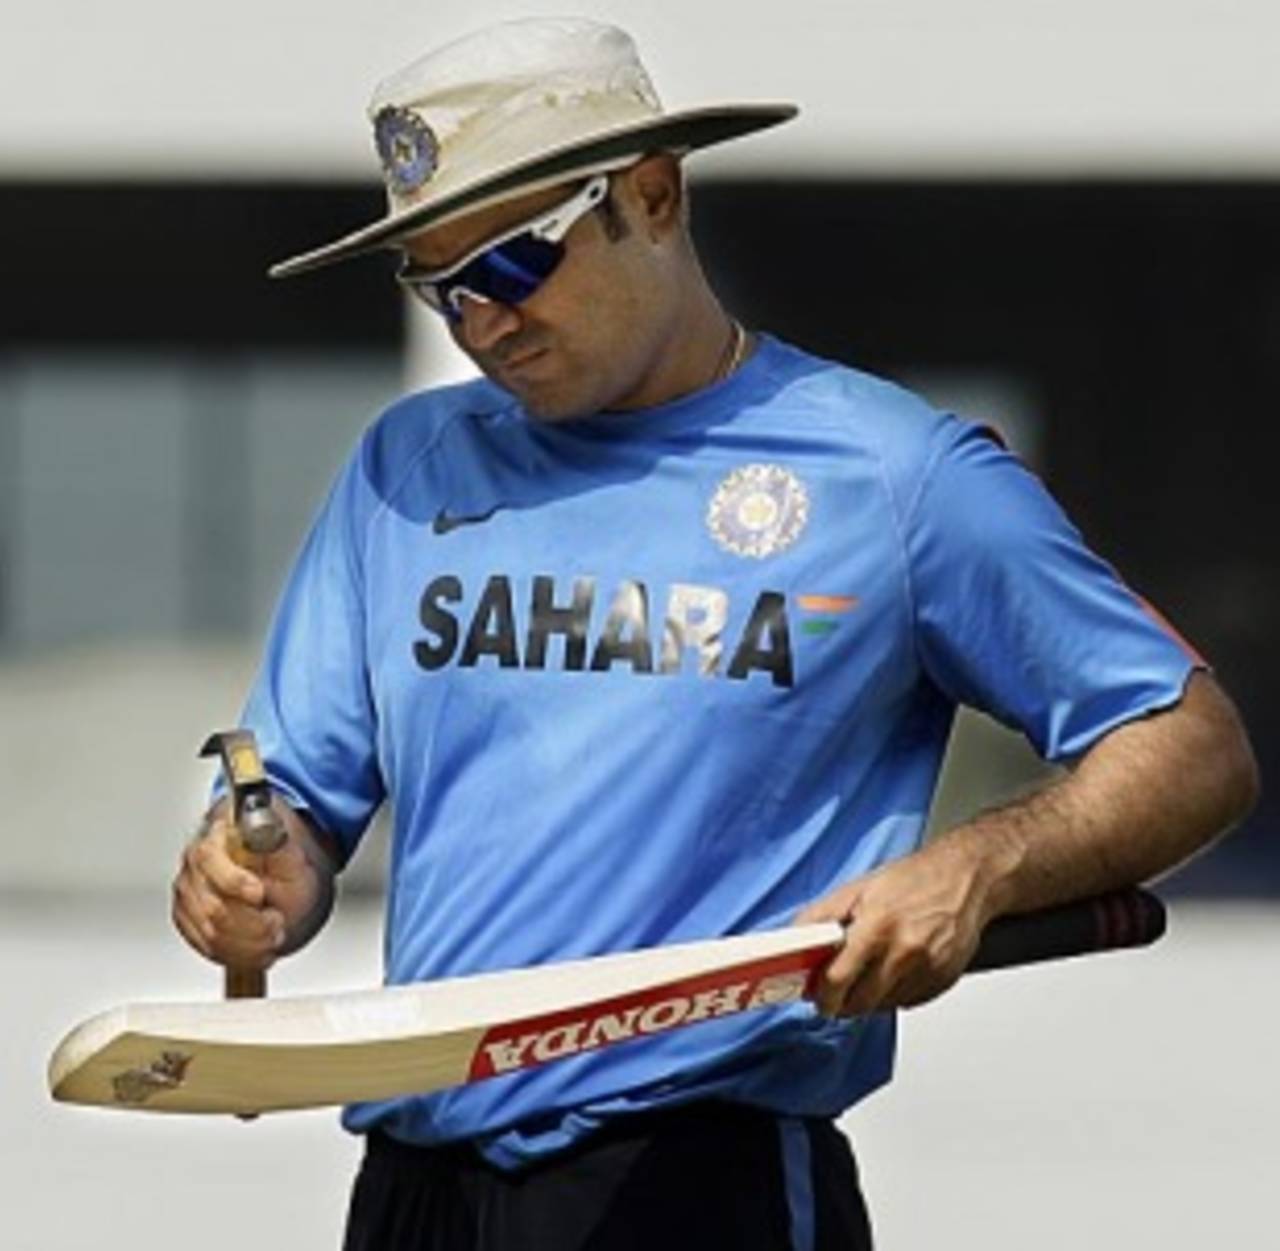 Virender Sehwag prepares his bat for another onslaught, Nagpur, December 17, 2009